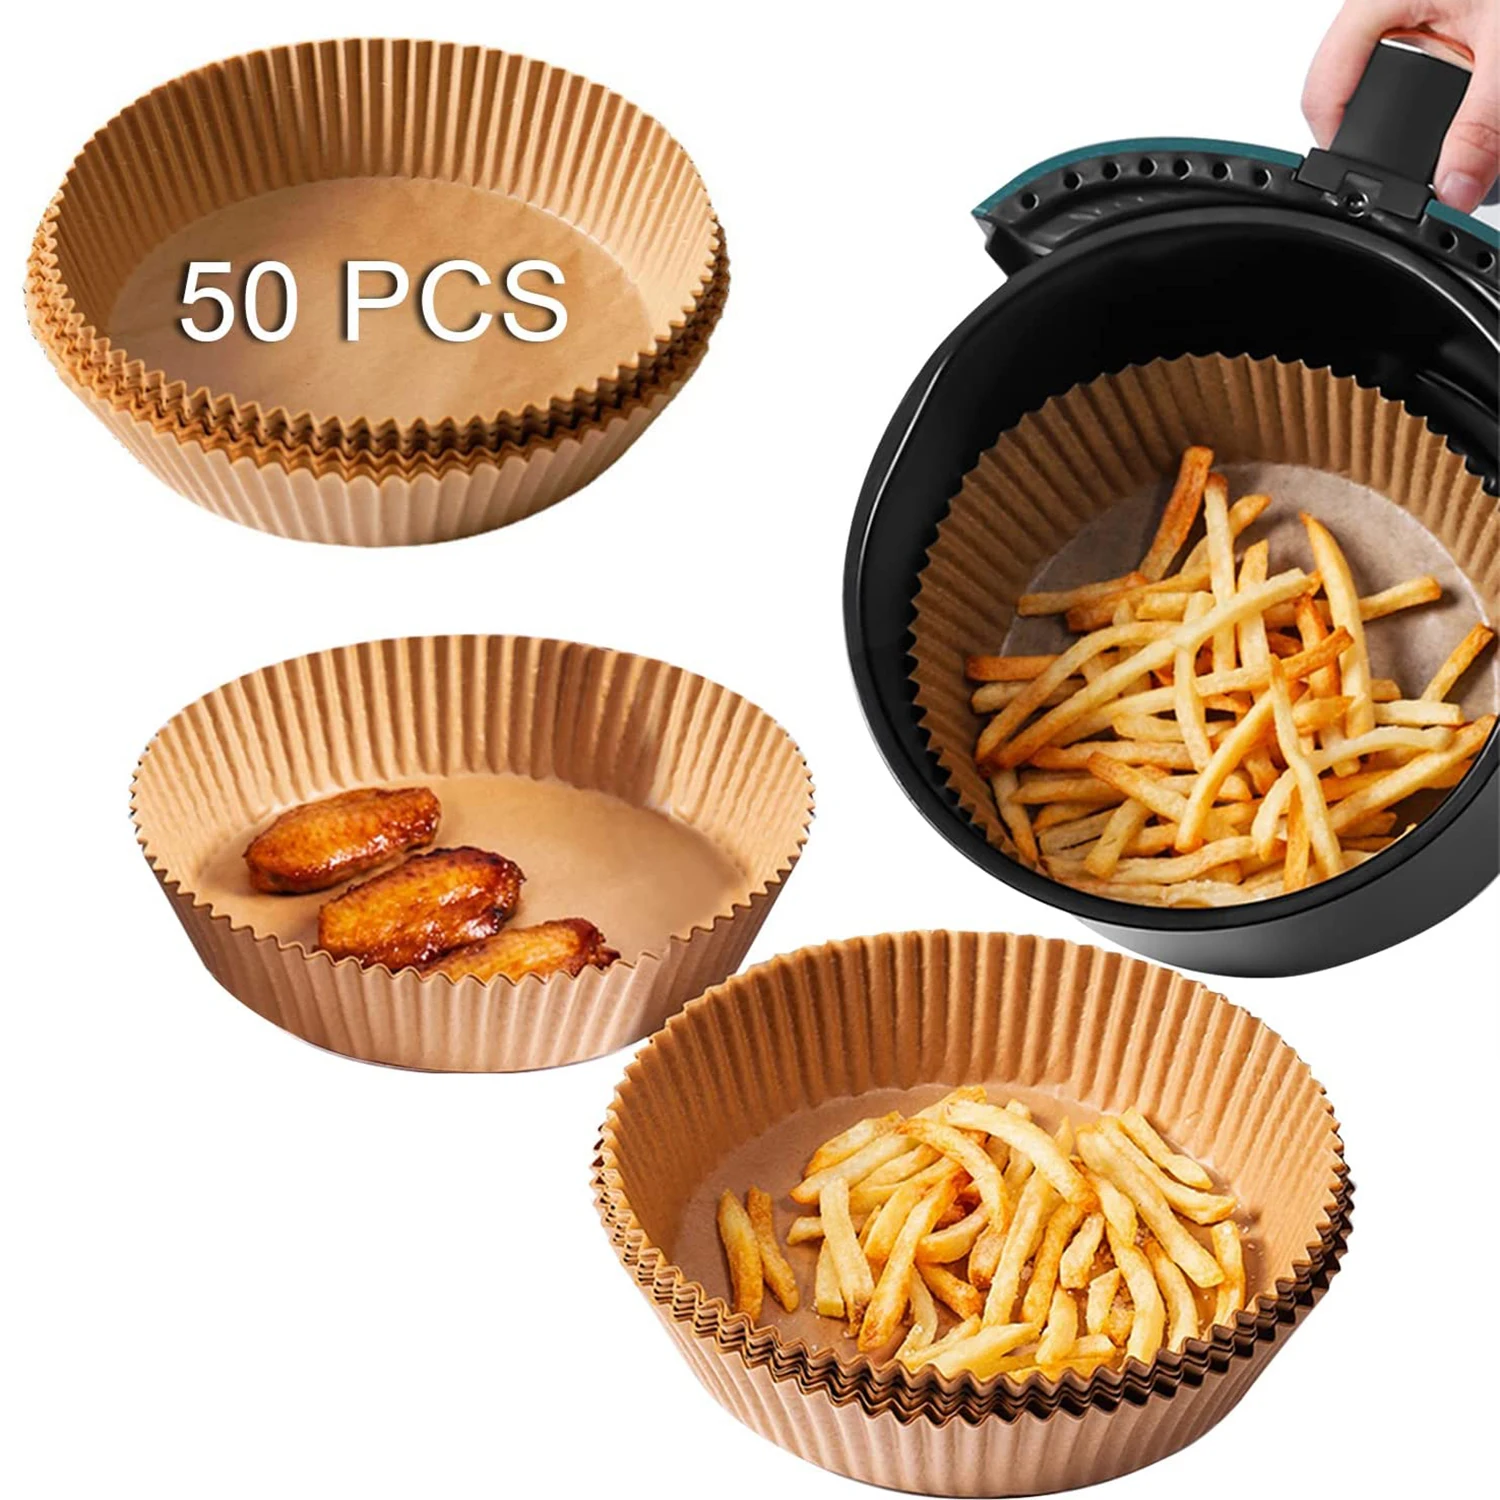 https://ae01.alicdn.com/kf/S82cdb5afe5f34da6a4a2163810f5354fT/50pcs-24cm-Air-Fryer-Parchment-Paper-Liners-Non-Stick-Disposable-Paper-Tray-Barbecue-Plate-Food-Oven.jpg